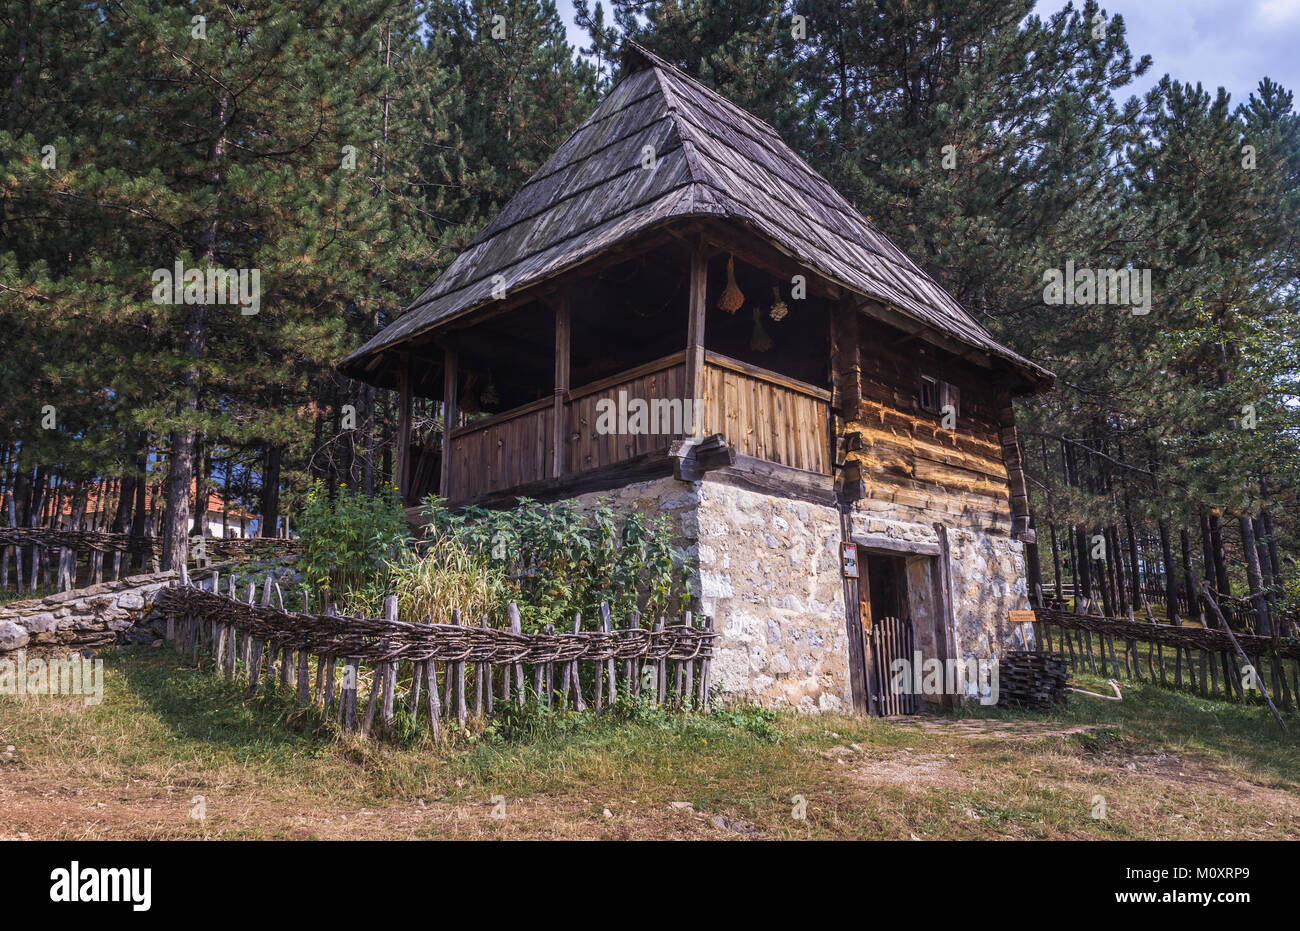 Wooden cottage with porch from 1890 in Ethnographic heritage park called Old Village Museum in Sirogojno village, Zlatibor region, Serbia Stock Photo